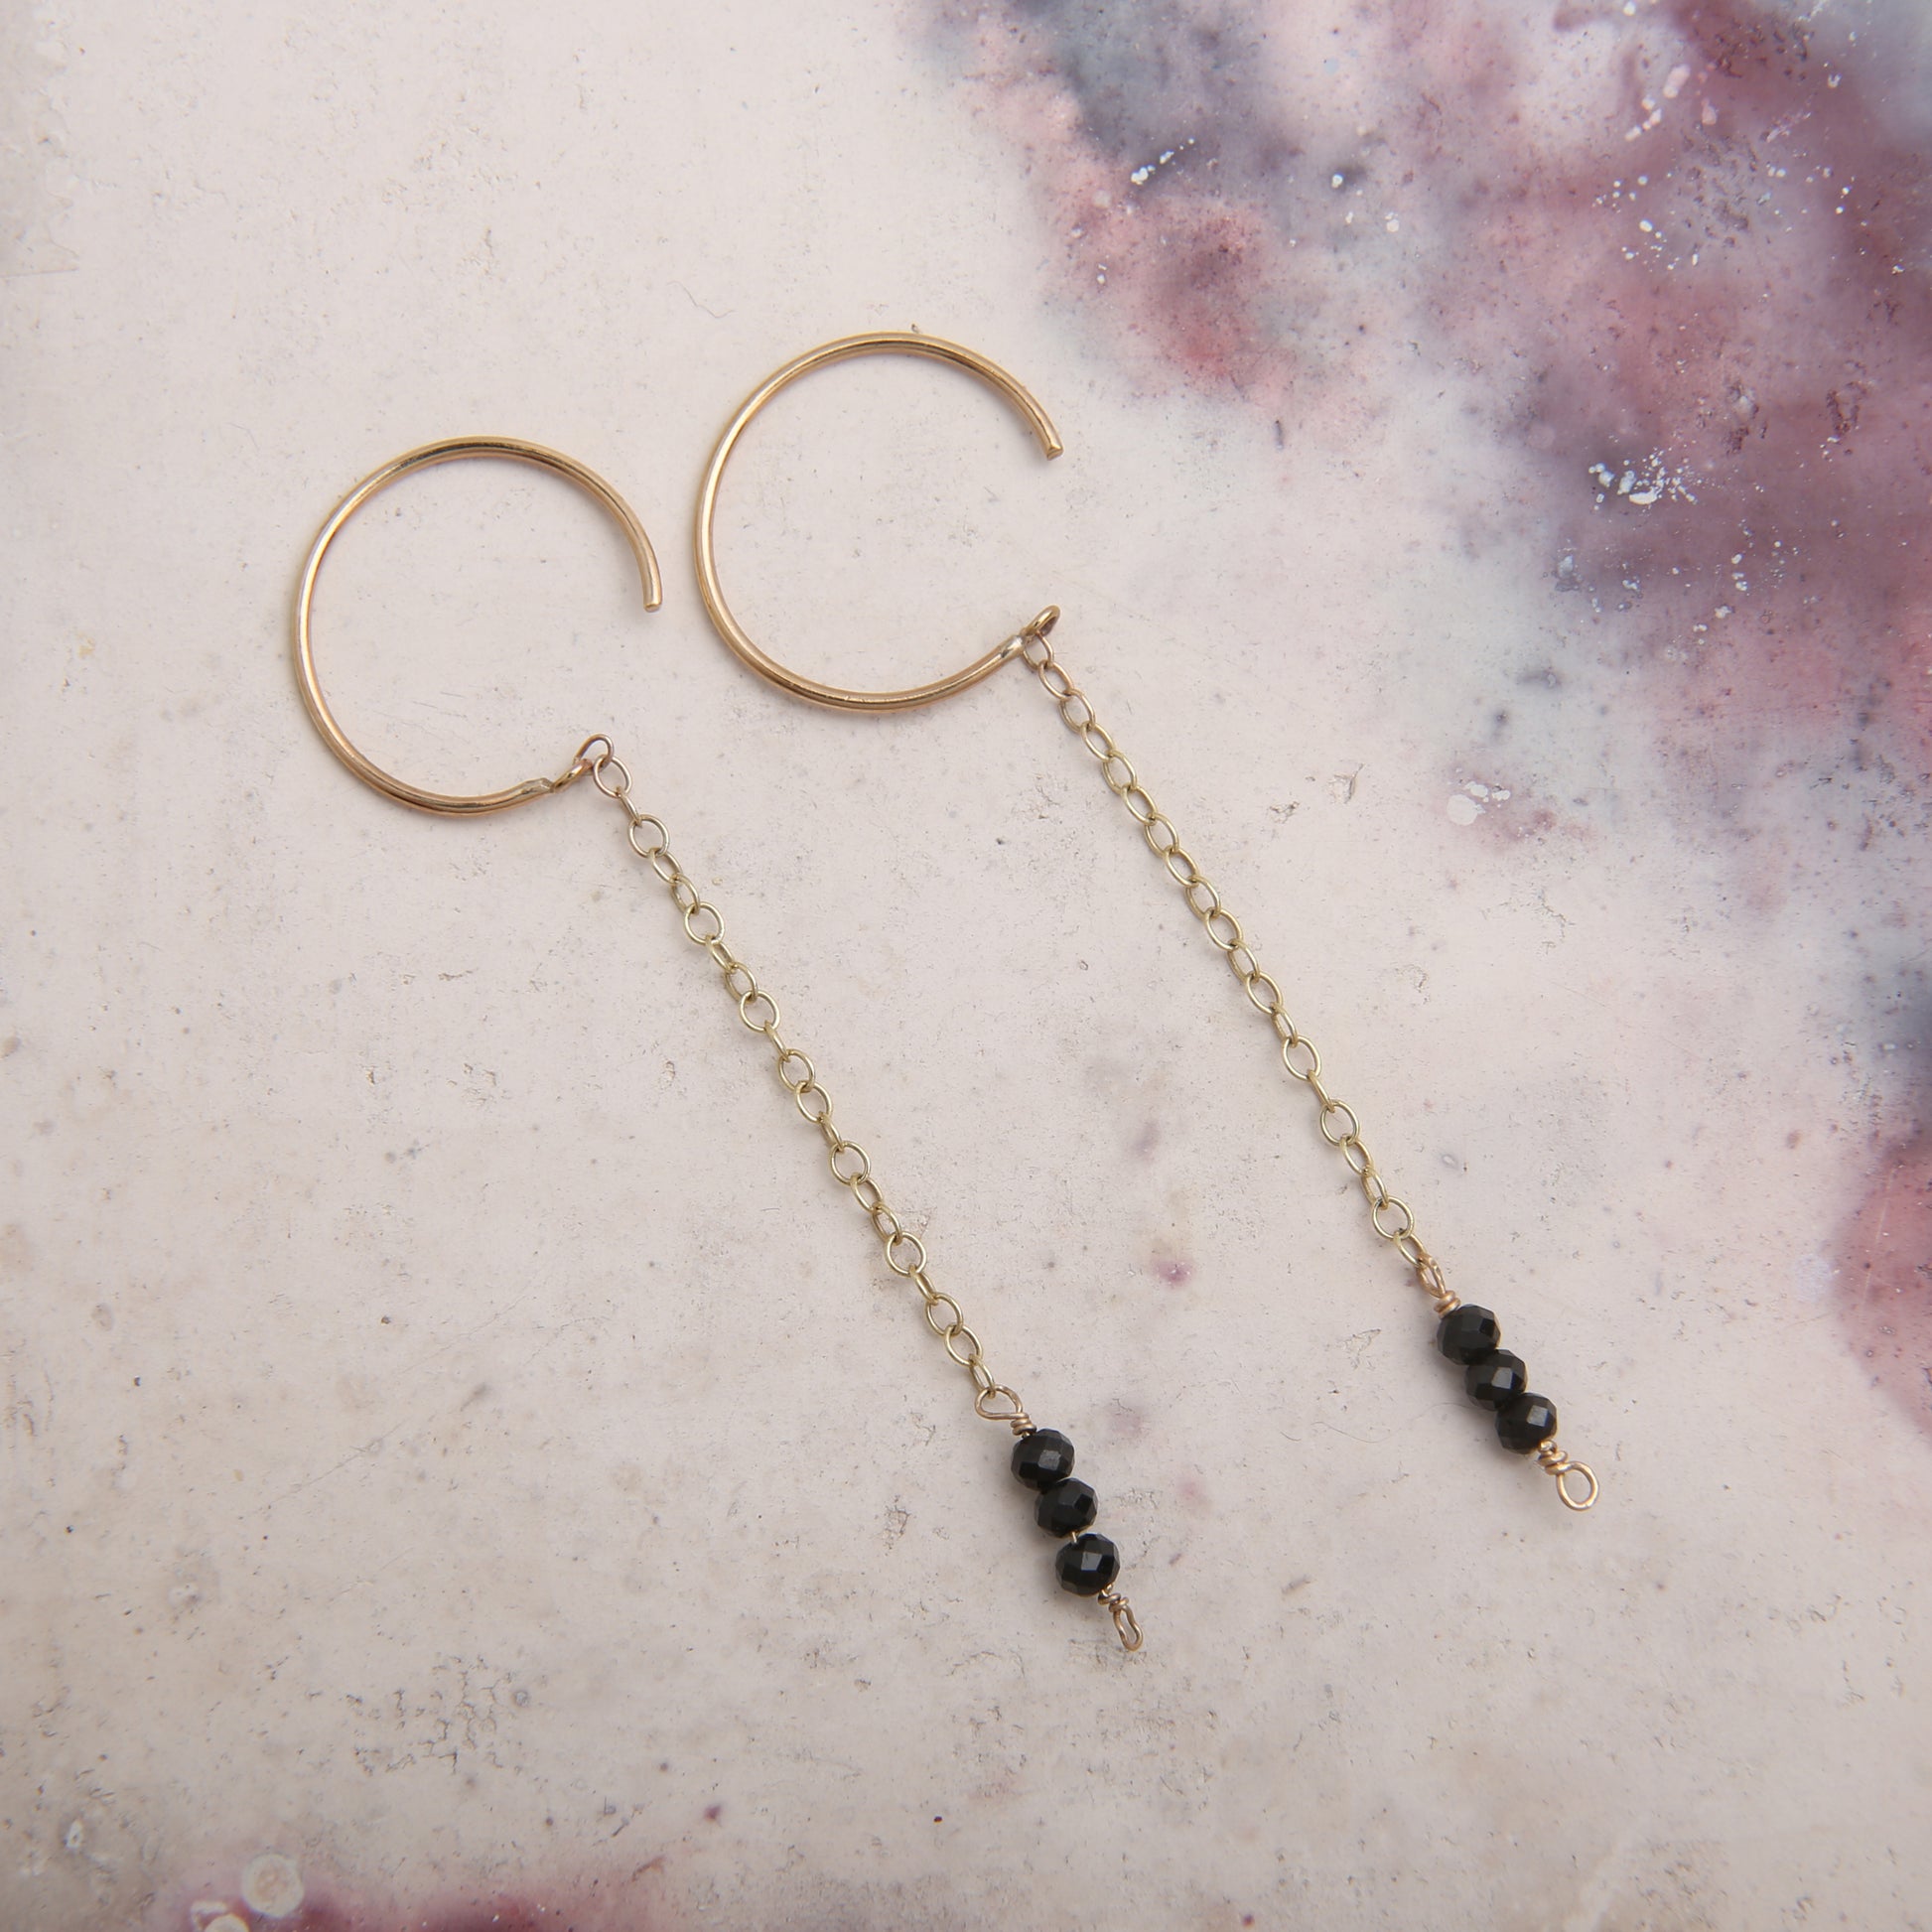 gold hoop earrings with gold chain and black spinel gemstones - pink marbled background